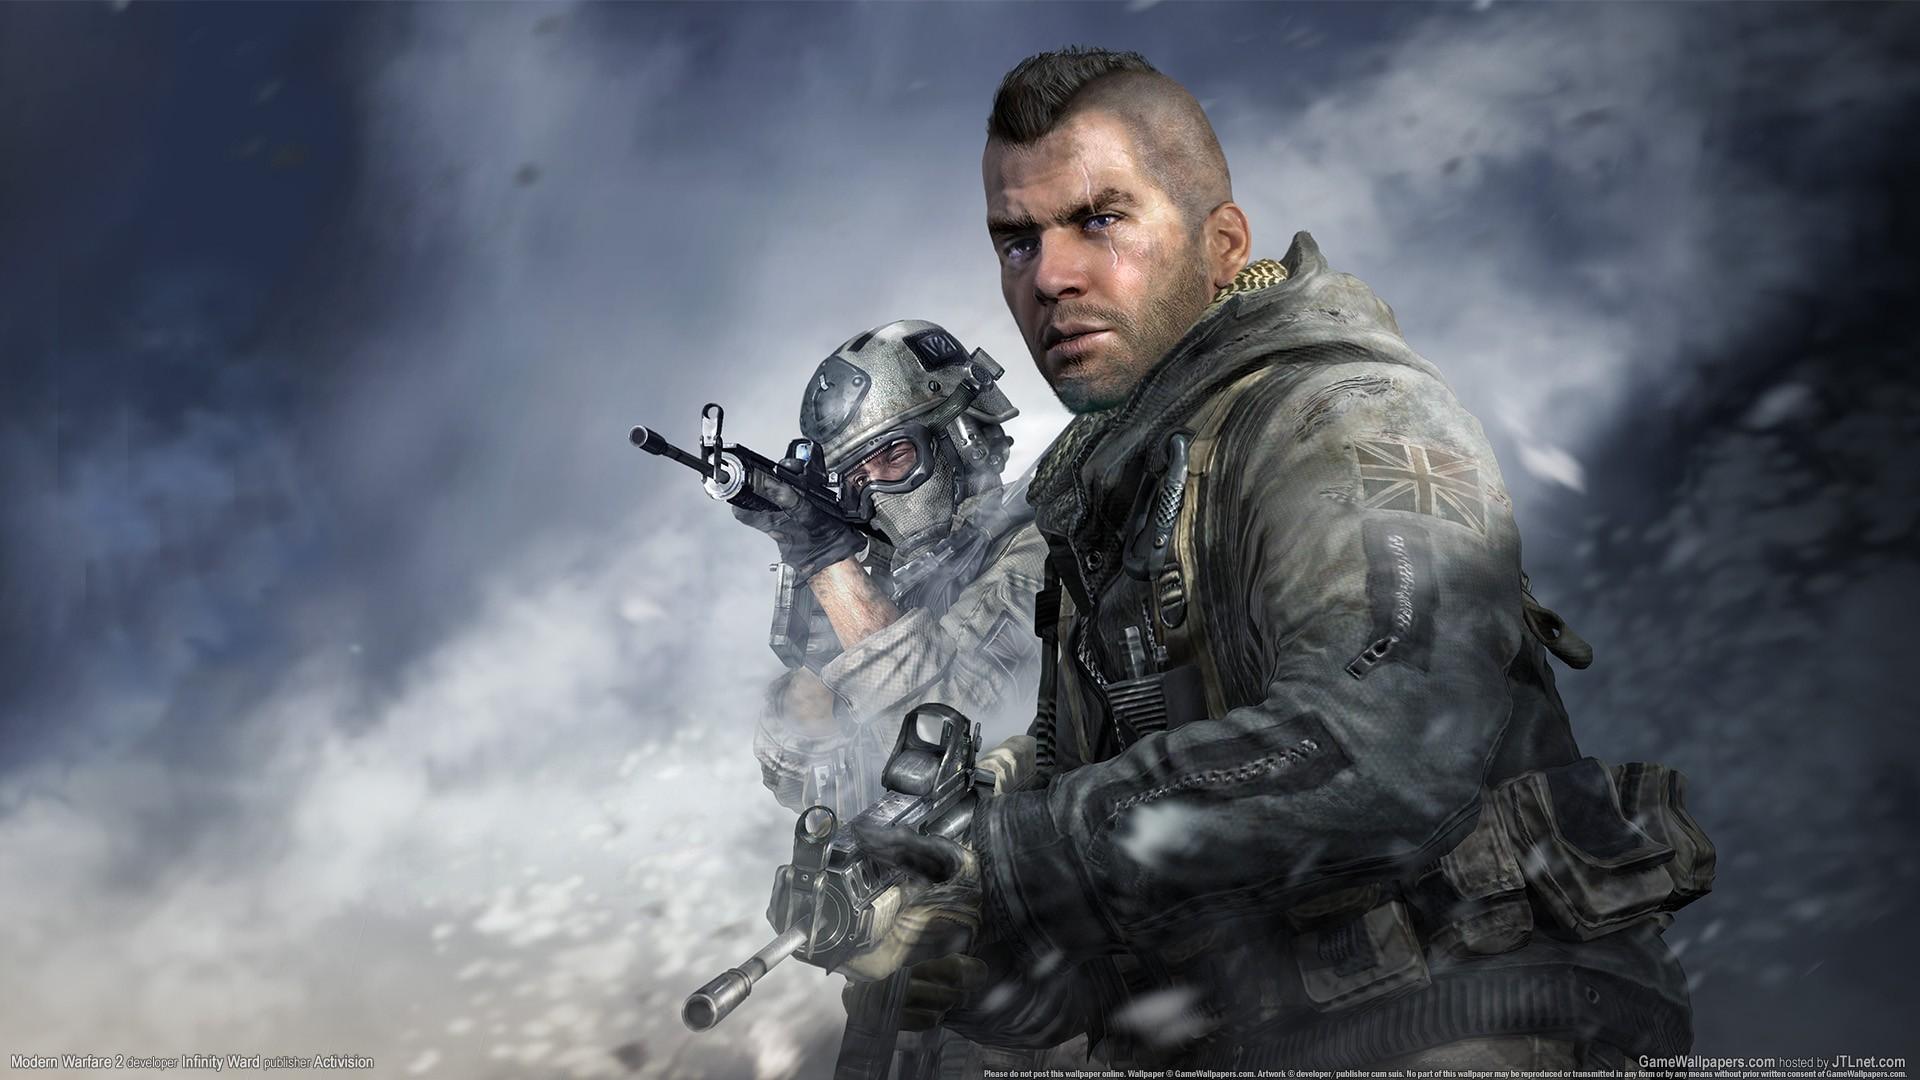 1920 x 1080 · jpeg - Call Of Duty: Modern Warfare 2 Wallpapers, Pictures, Images